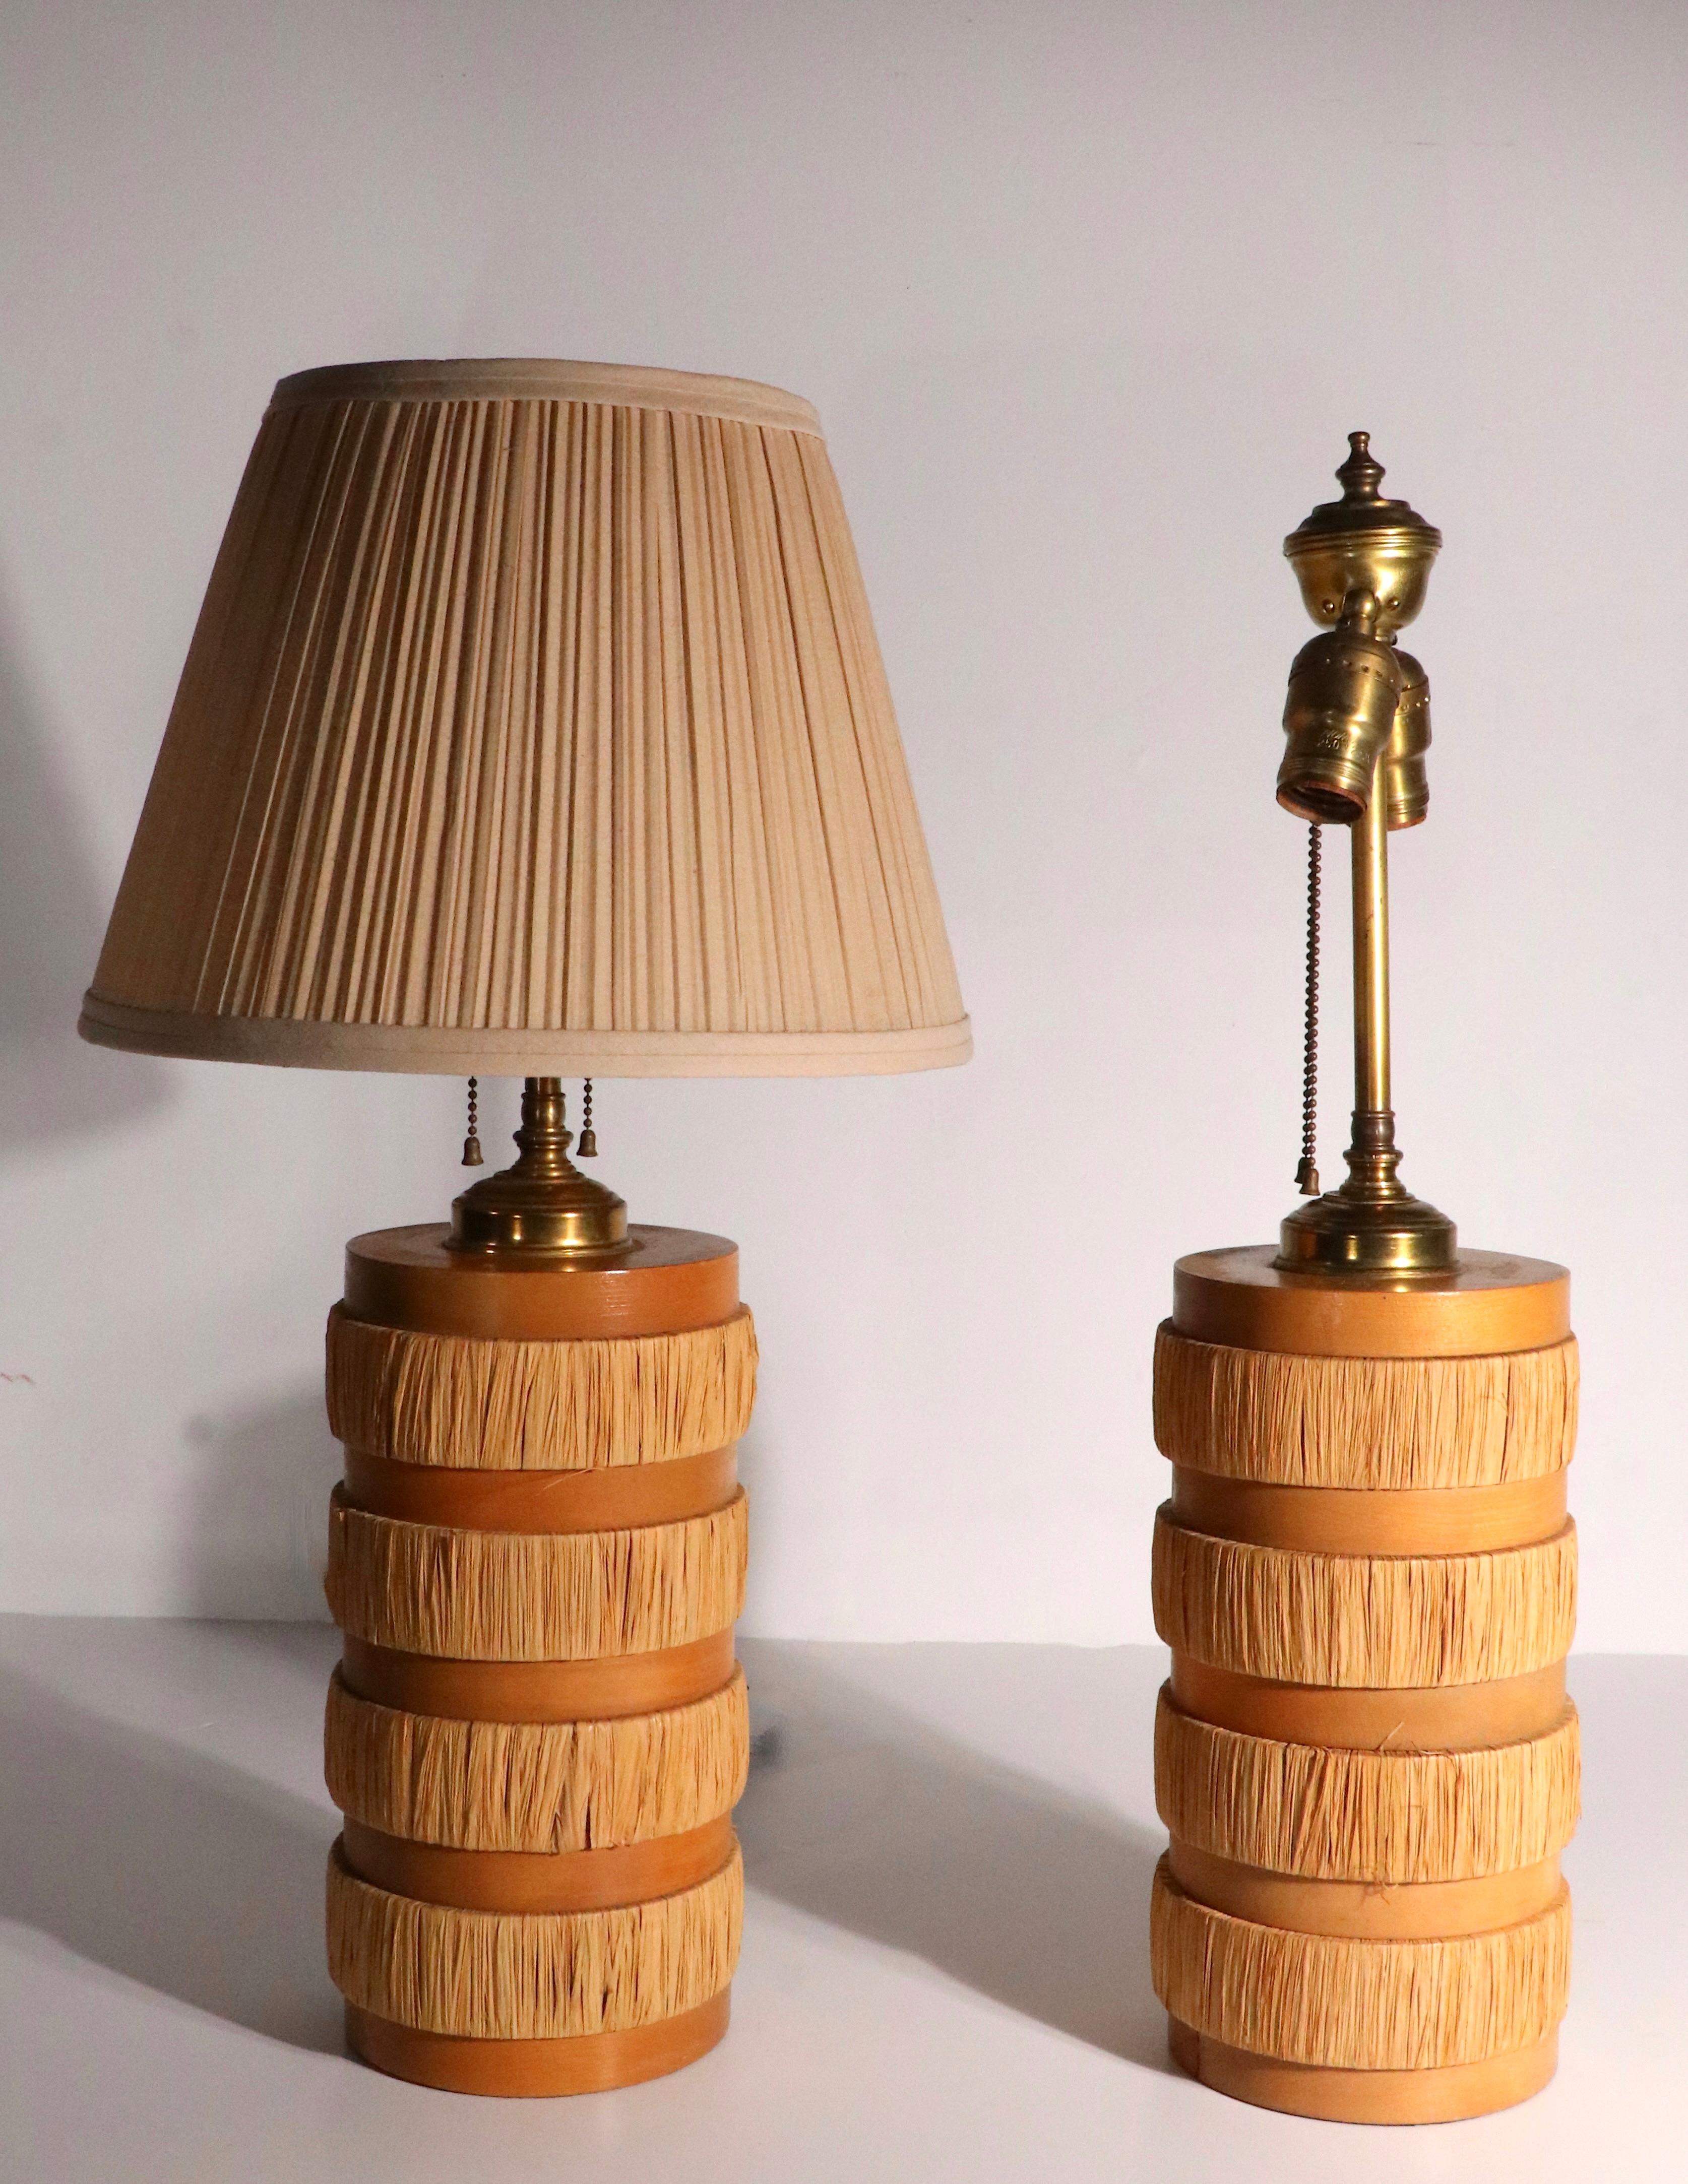 Pair Mid century table lamps of stacked wood disks with alternating disks of wrapped rush. Each lamp has two pull chain sockets, each of which operates independently to allow a high and low intensity of light, lamps accept standard size screw in